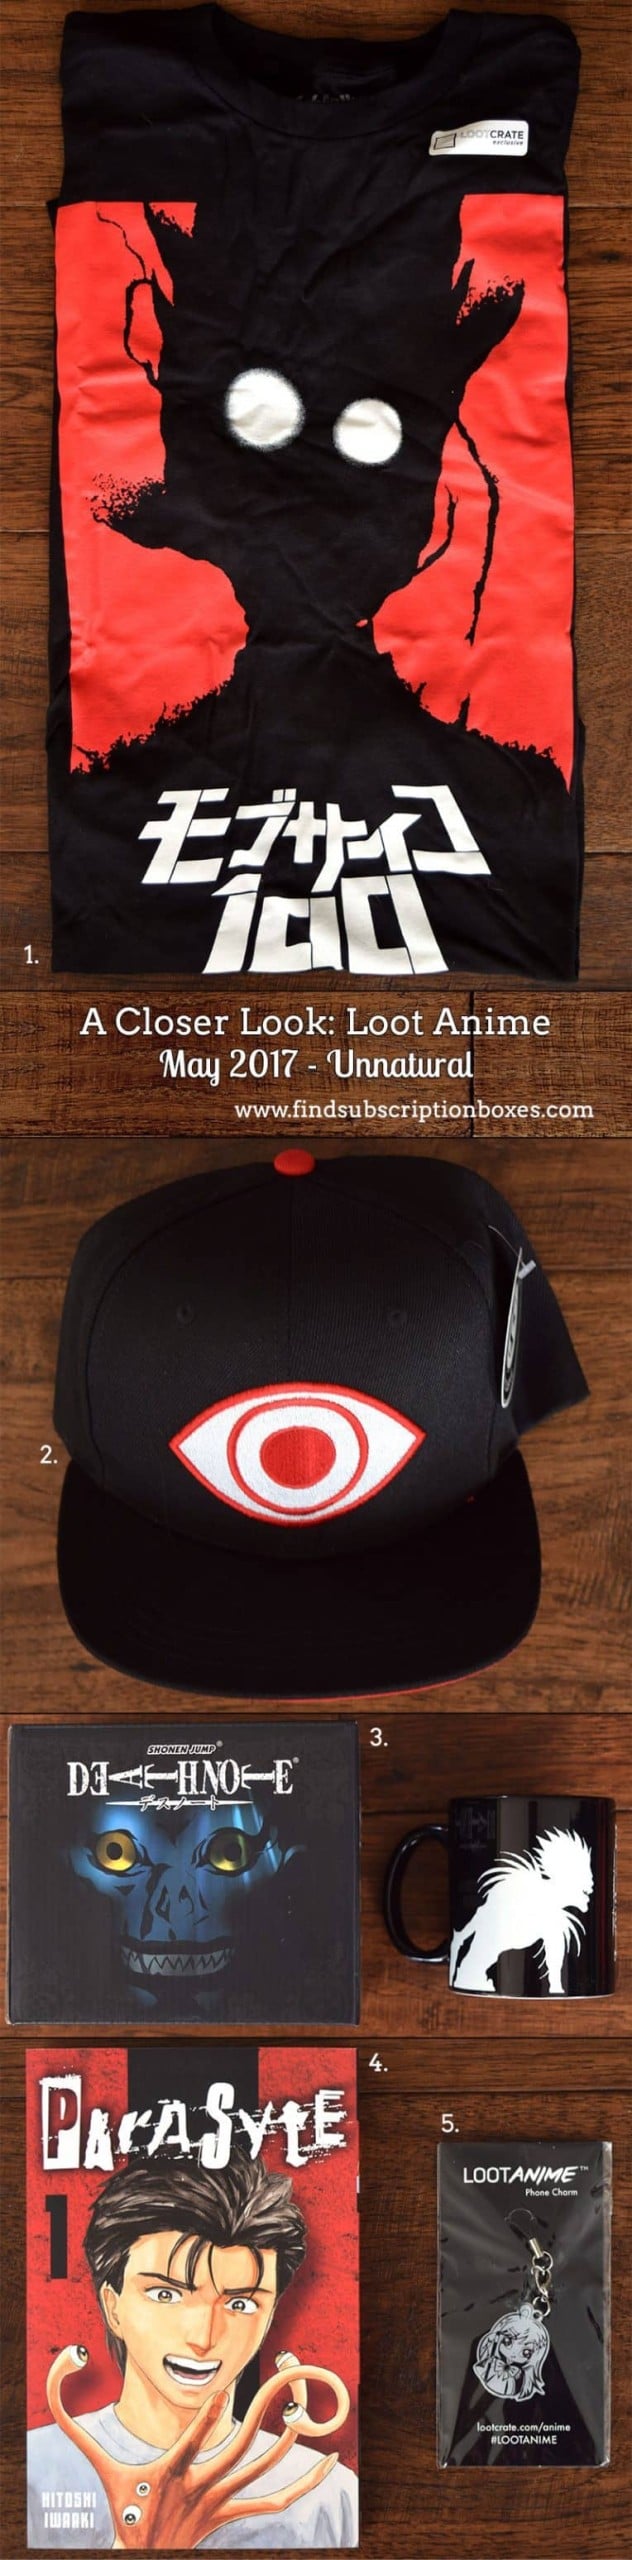 Loot Anime Reviews: Get All The Details At Hello Subscription!